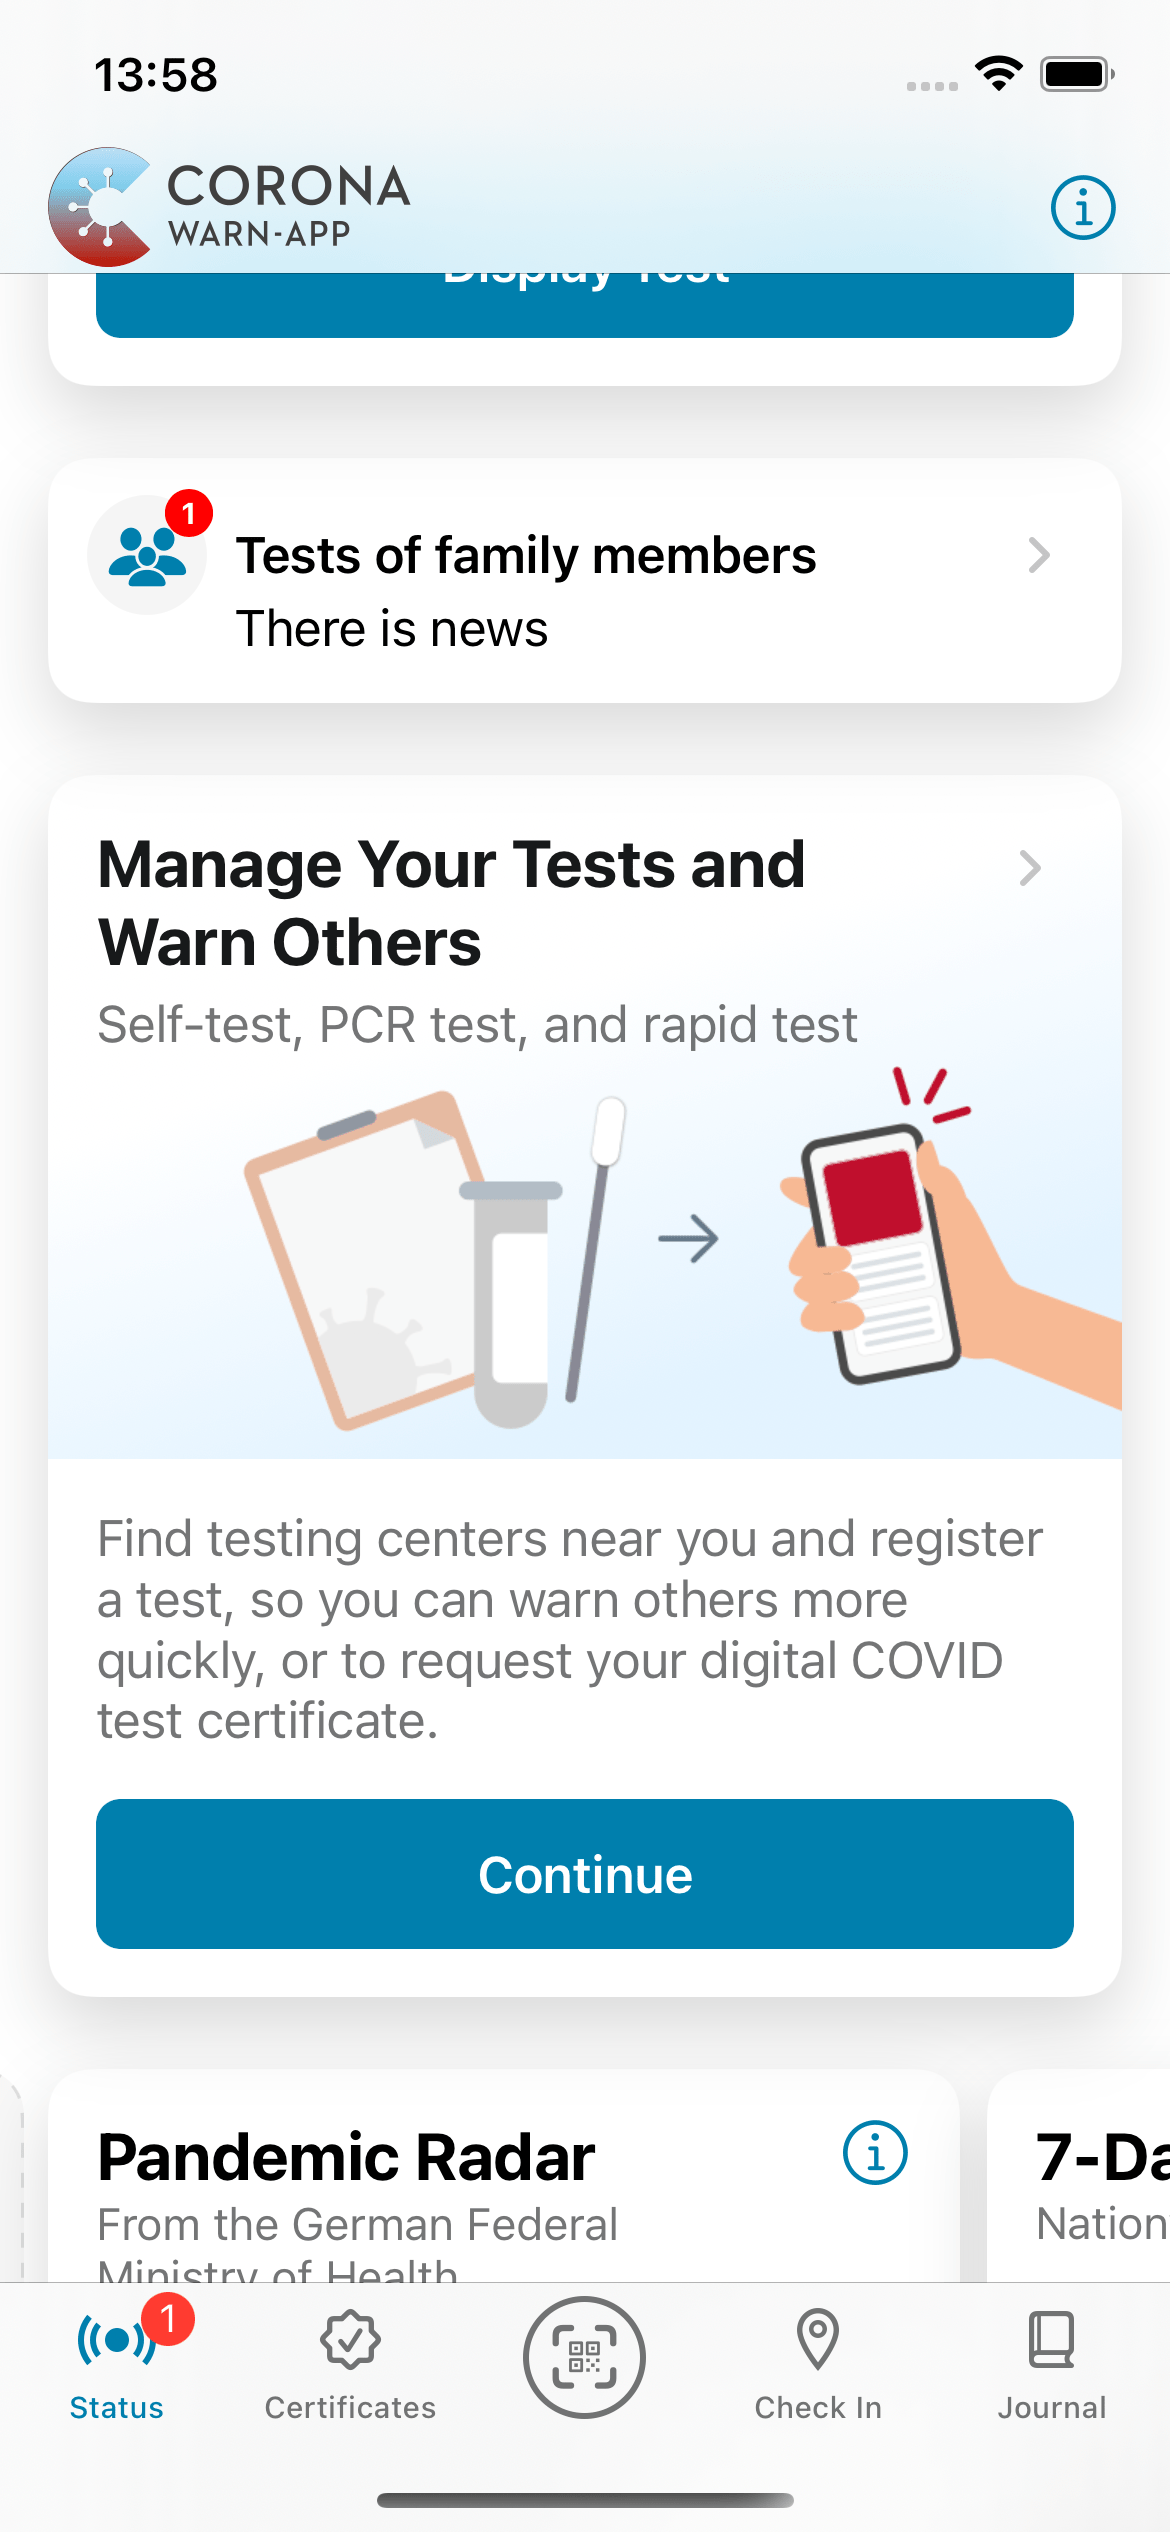 "Manage Your Tests and Warn Others" tile on "Status"